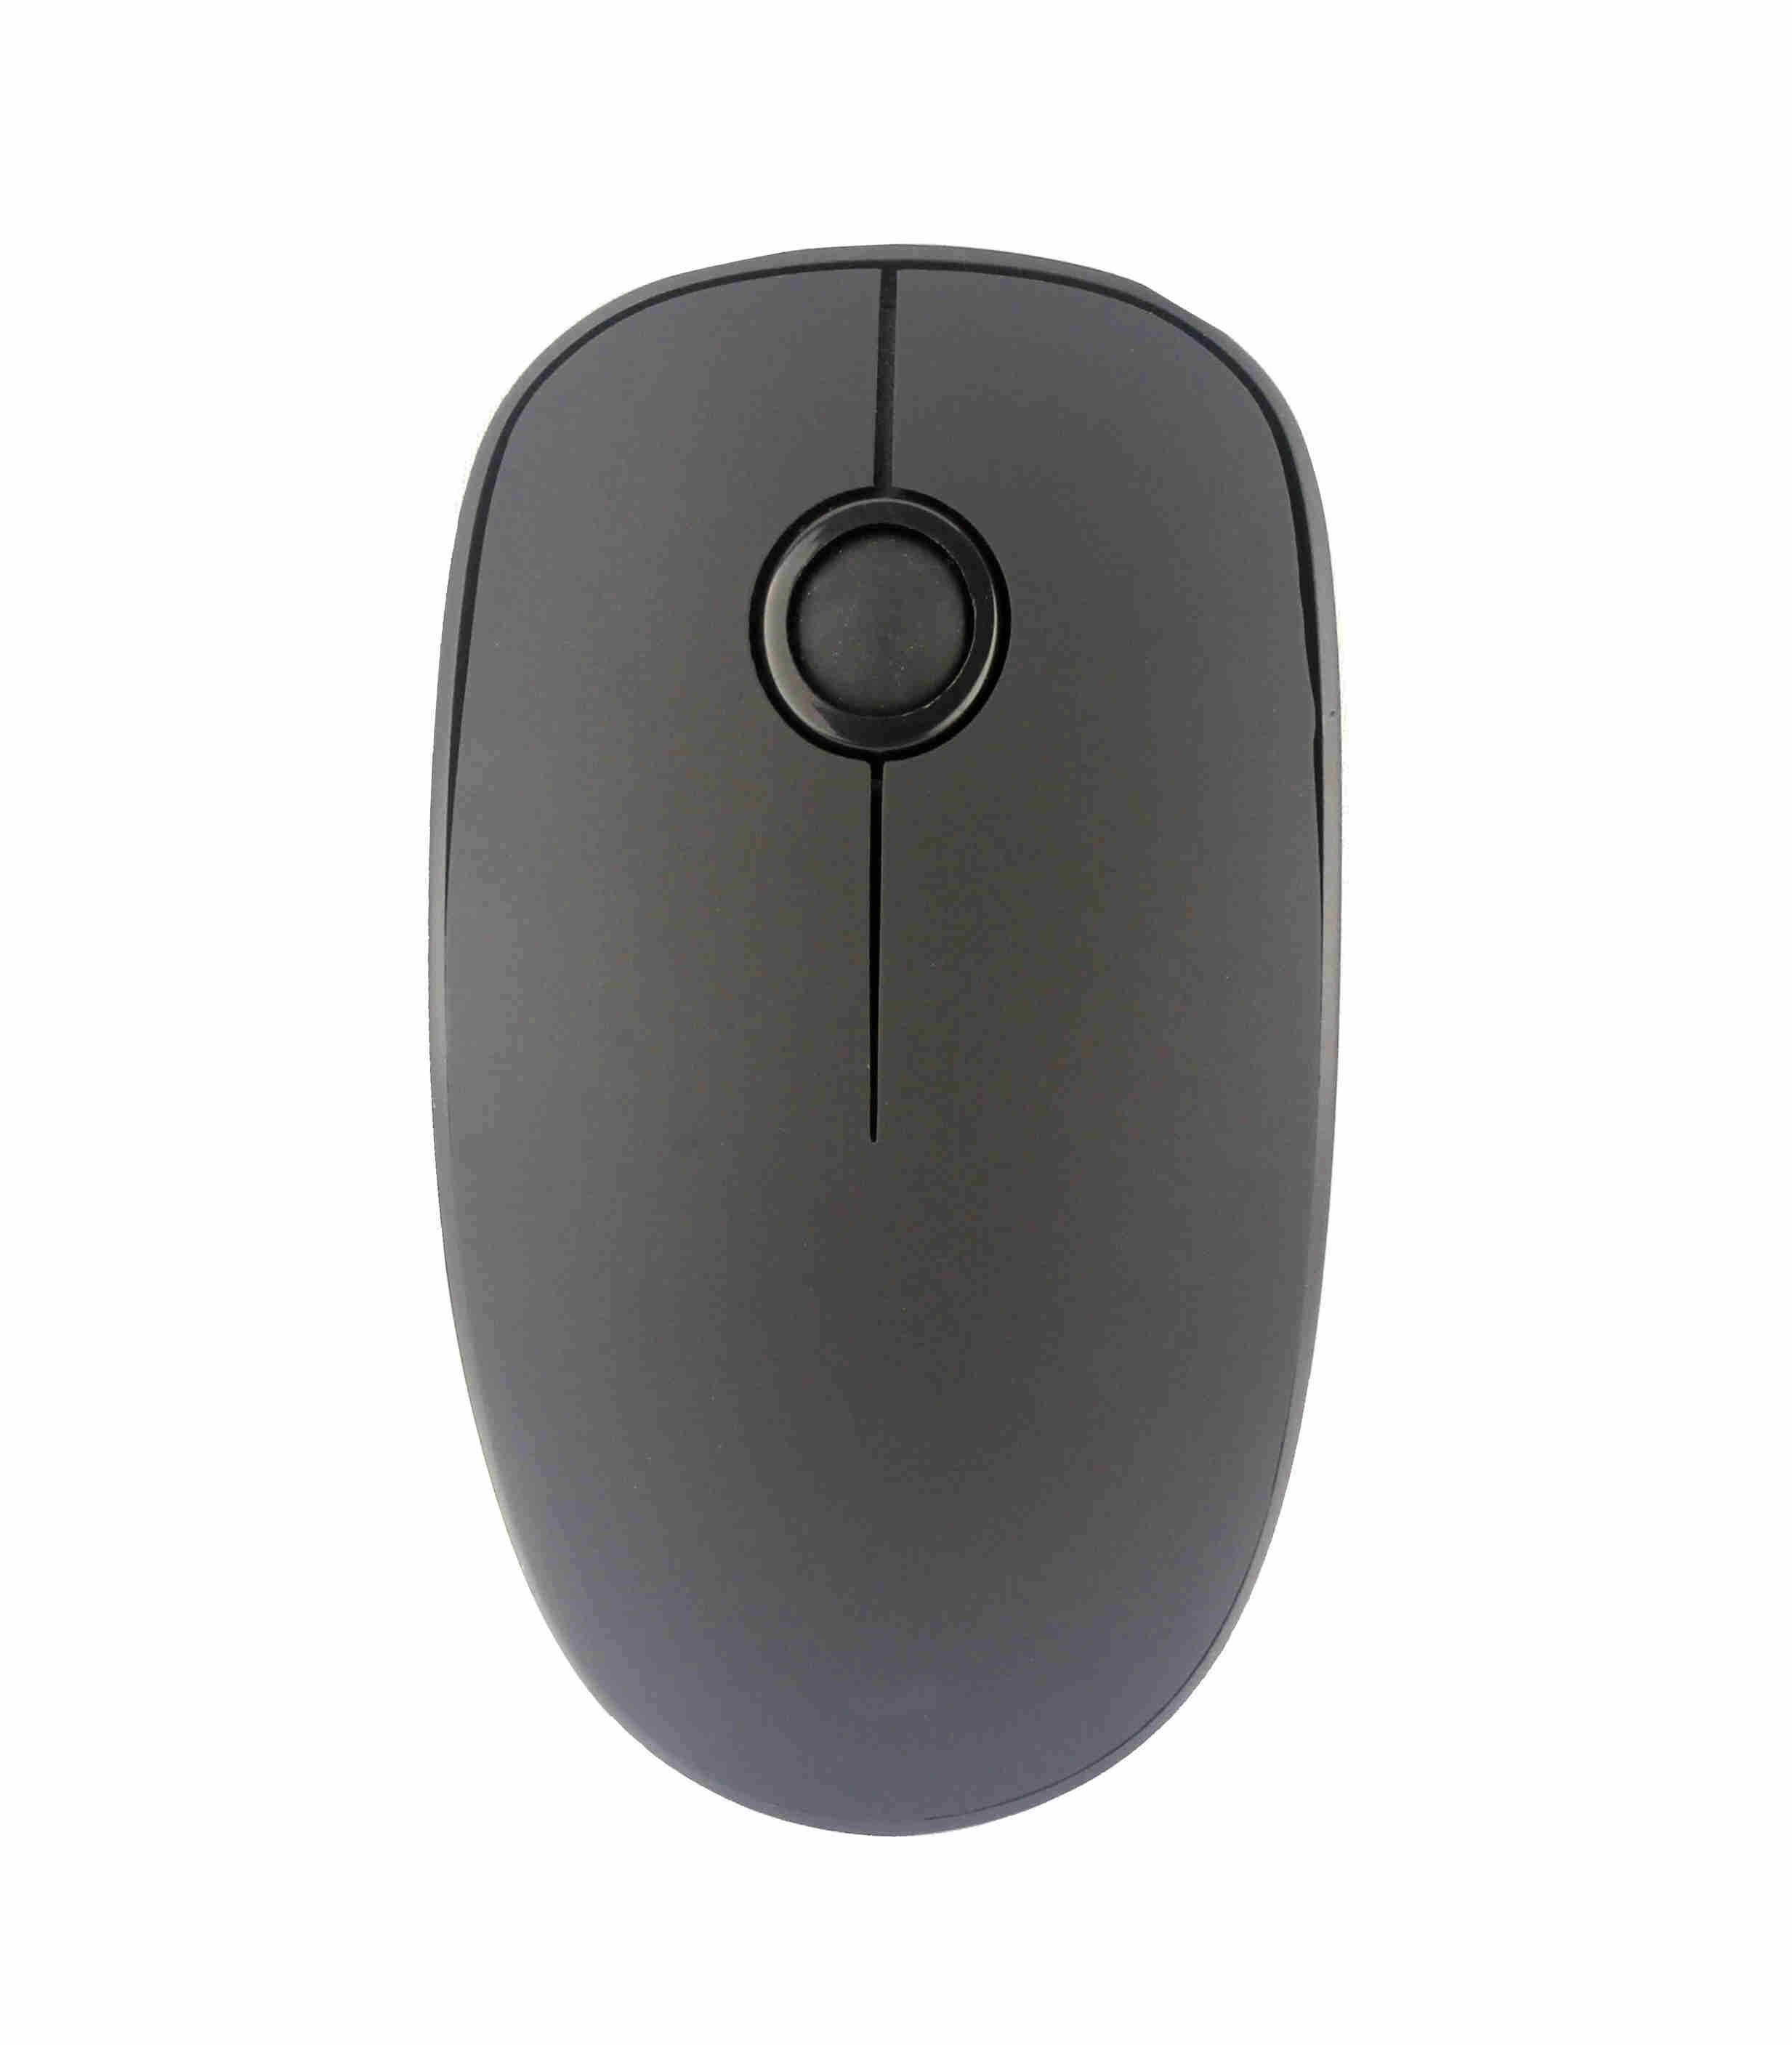 Silent Wireless Mouse,Mute Wireless Mouse,No Making Noise,3 Buttons,1200 DPI